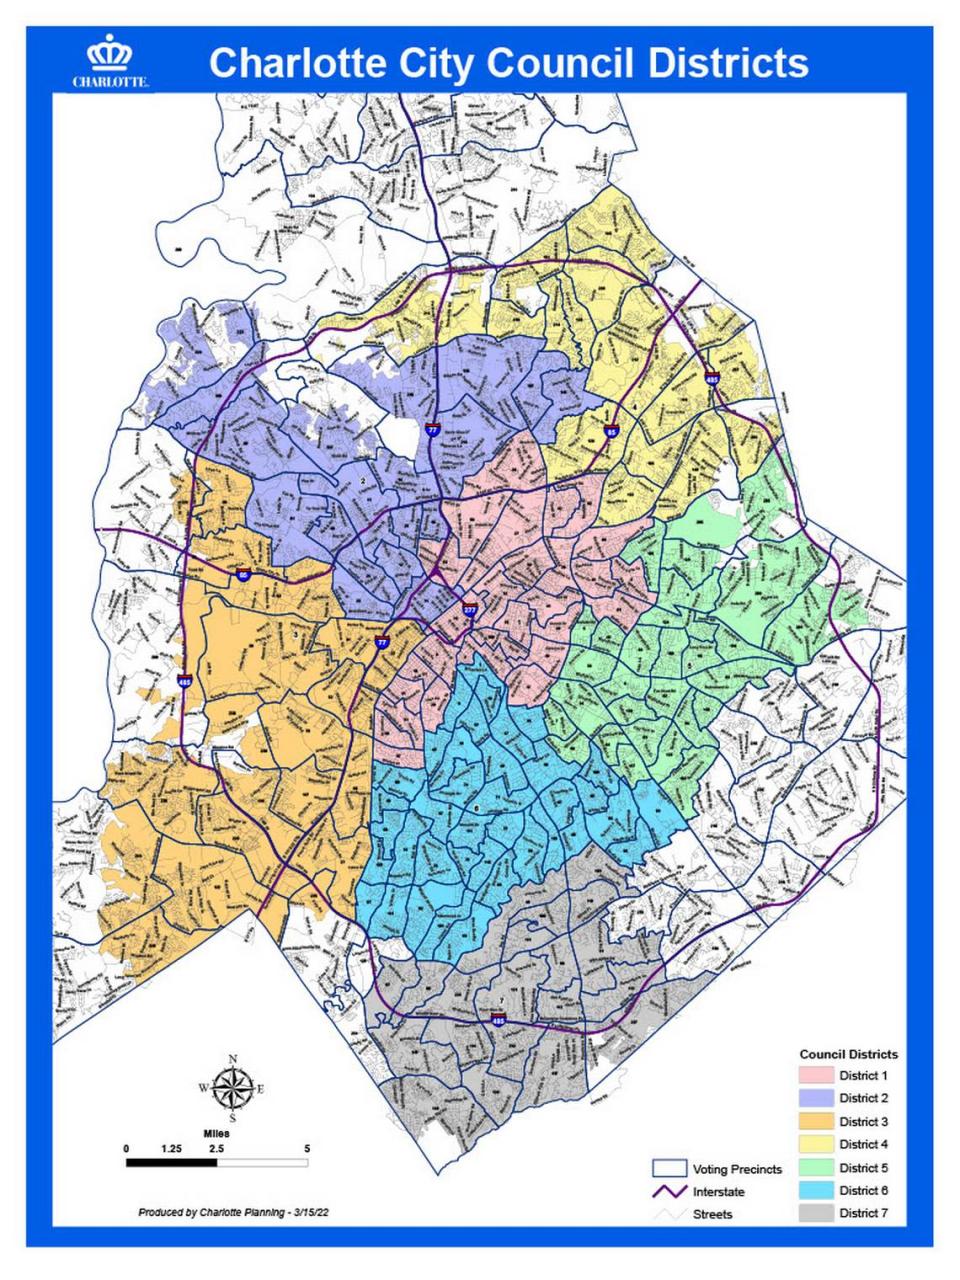 This map shows the Charlotte City Council districts.